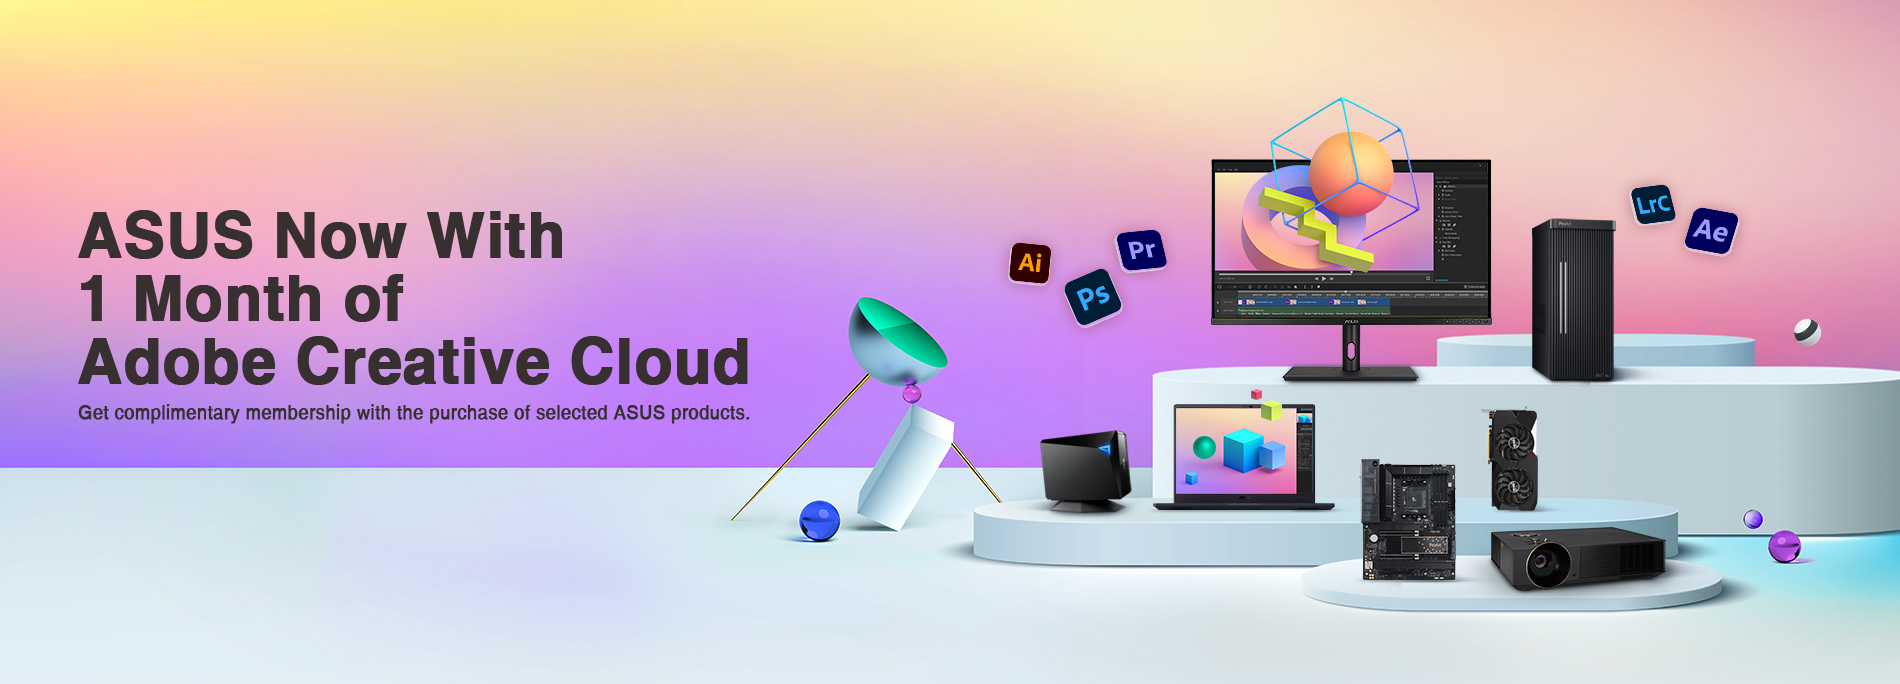 ASUS Now with 1 Month of Adobe Creative Cloud